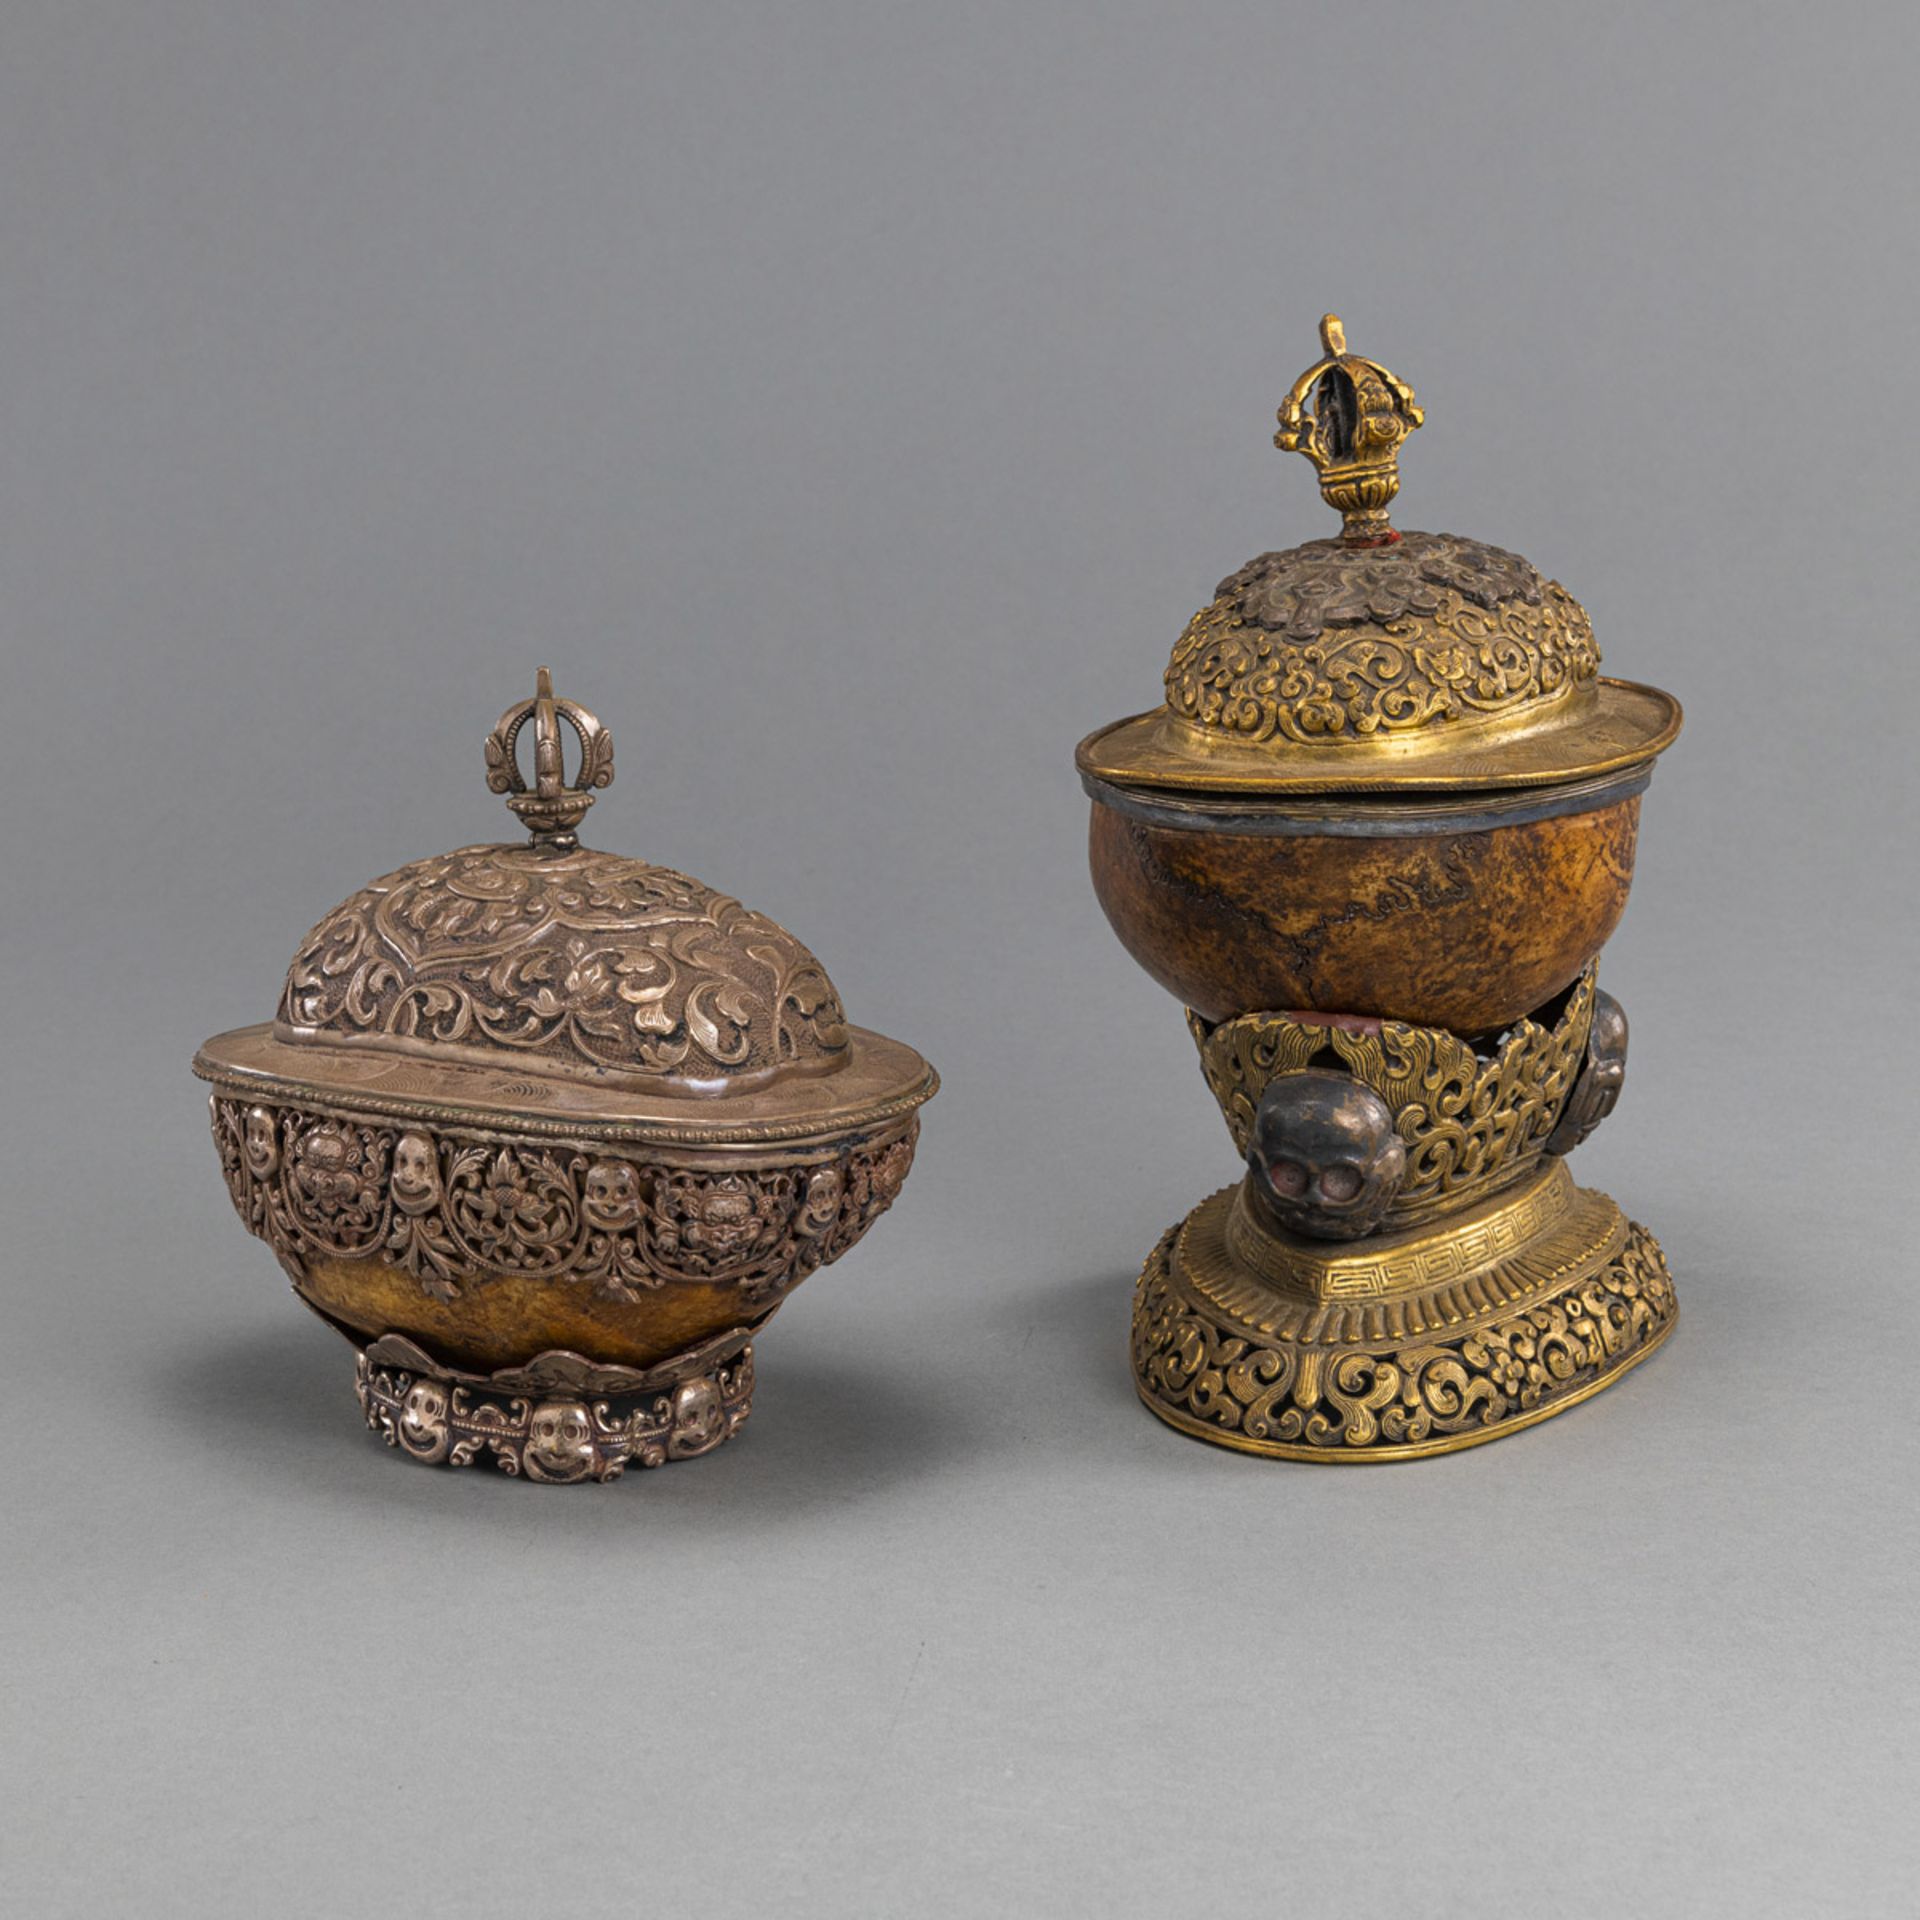 TWO MOUNTED KAPALA, PARTLY WORKED IN SILVER OR GILT-COPPER ON STANDS